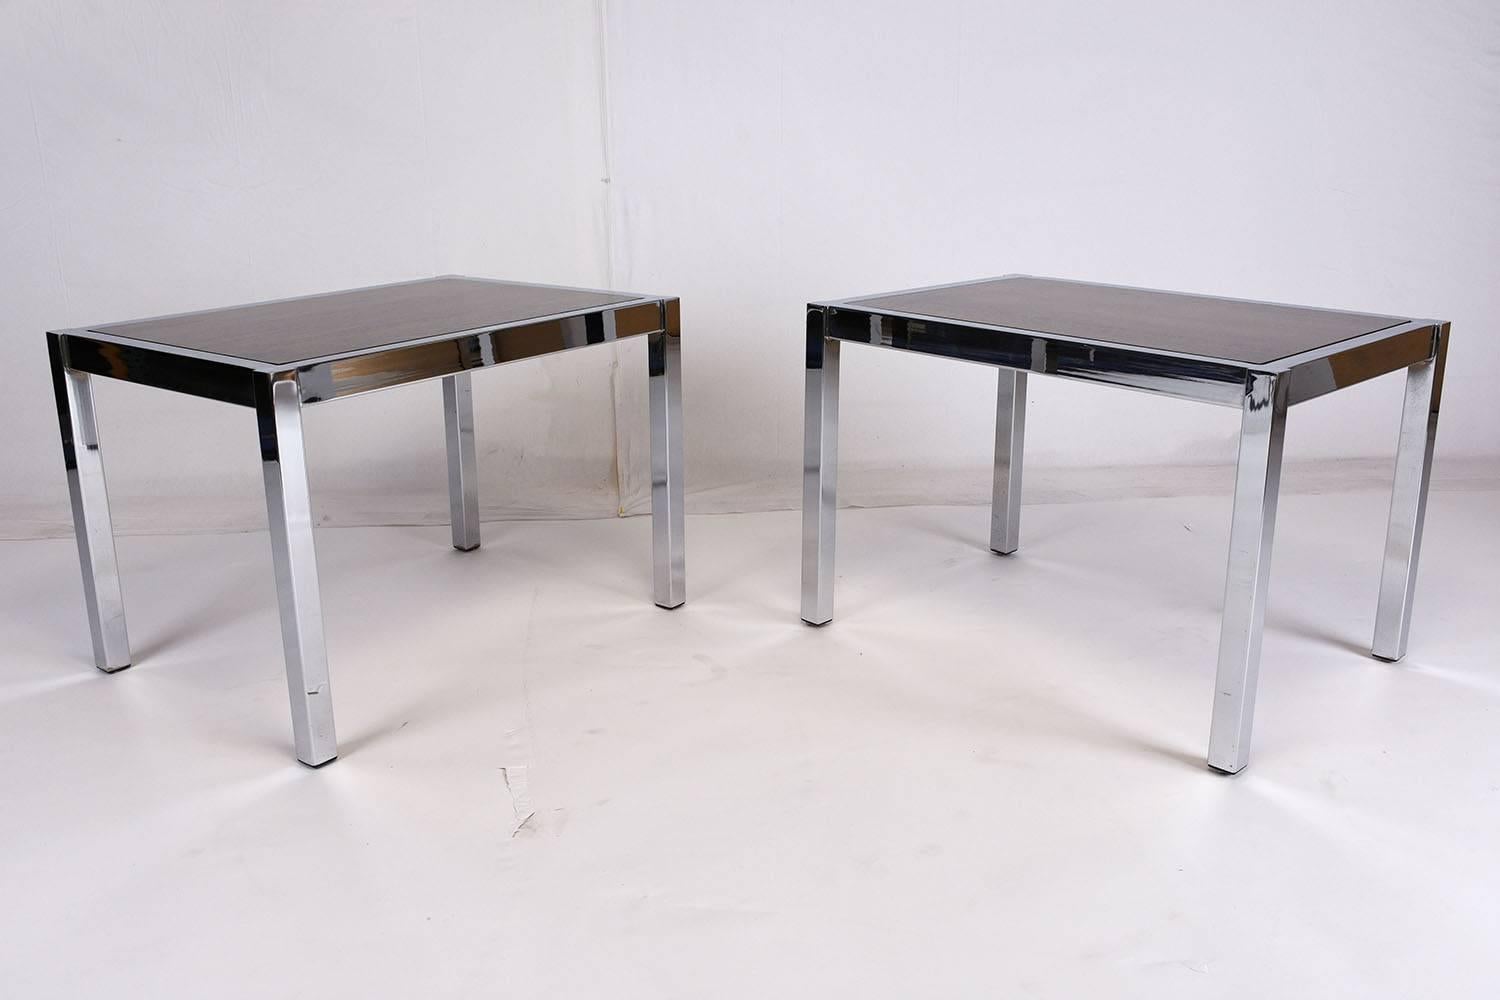 This pair of 1970s Mid-Century Modern style side tables feature a simple, but elegant chrome frame. The base is highlighted by a rosewood top with a rich stain and a lacquered finish. This pair of side tables is sturdy, stylish, and ready to be used